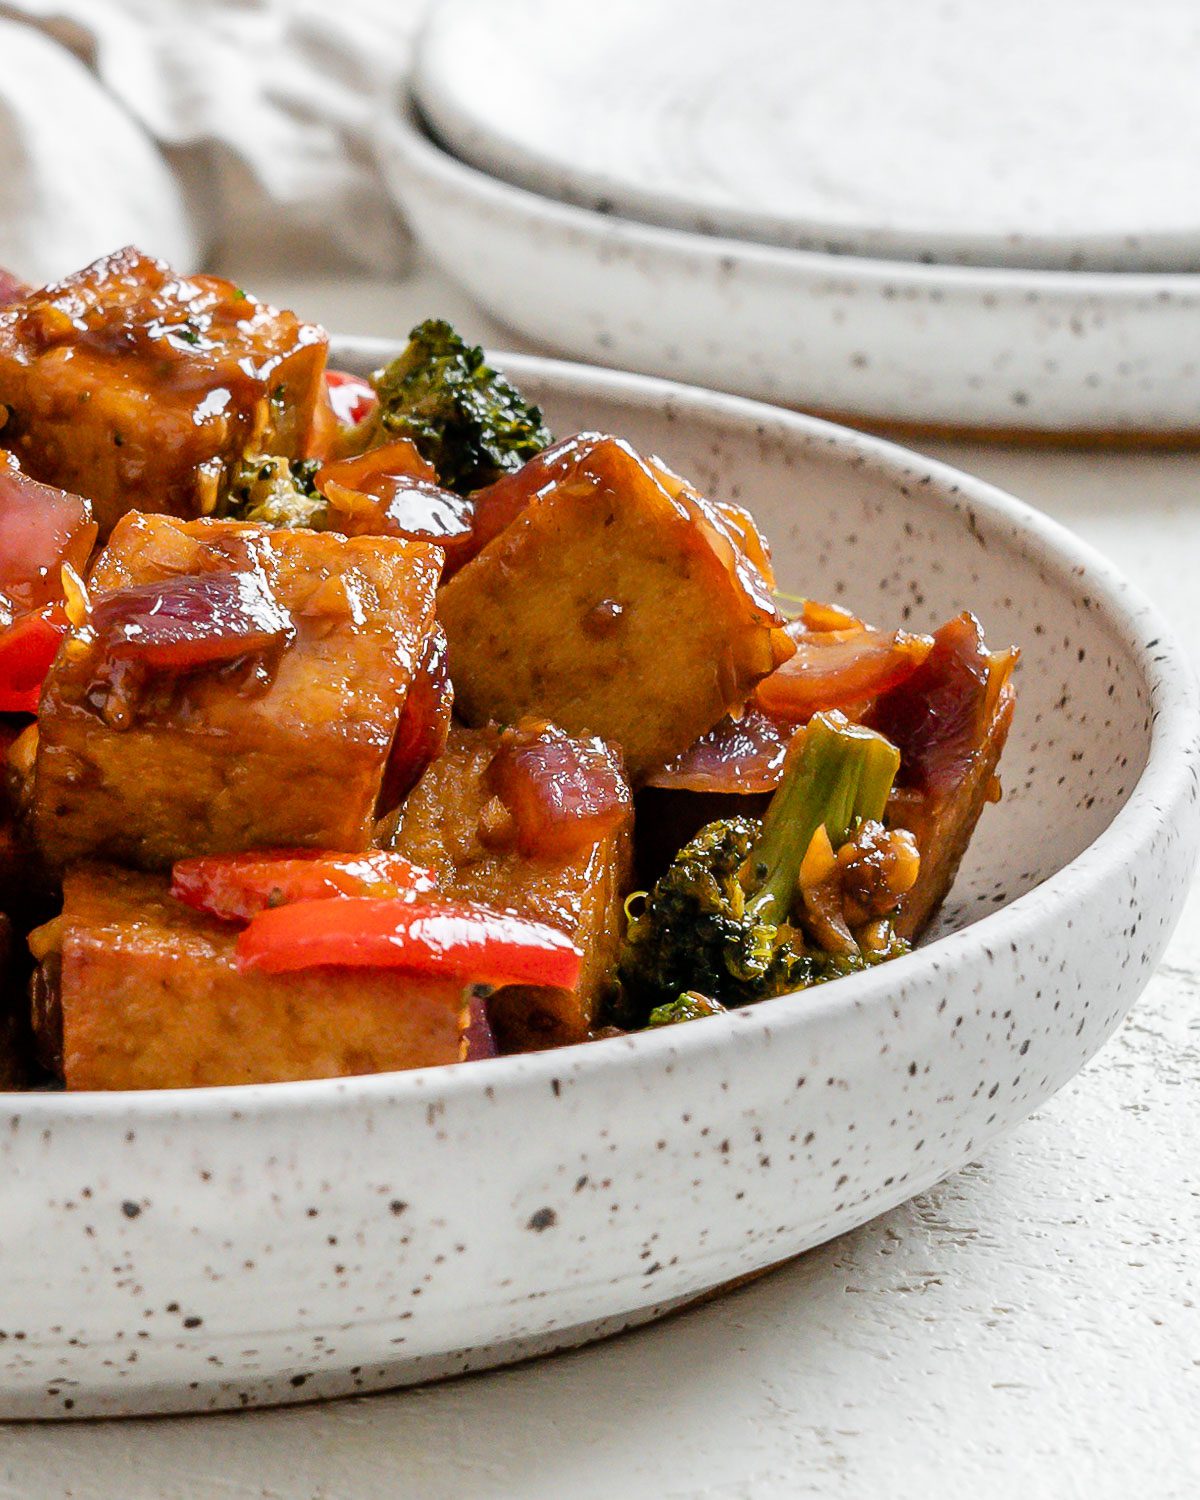 completed Vegan Teriyaki Tofu Stir Fry plated on a white bowl against a light surface